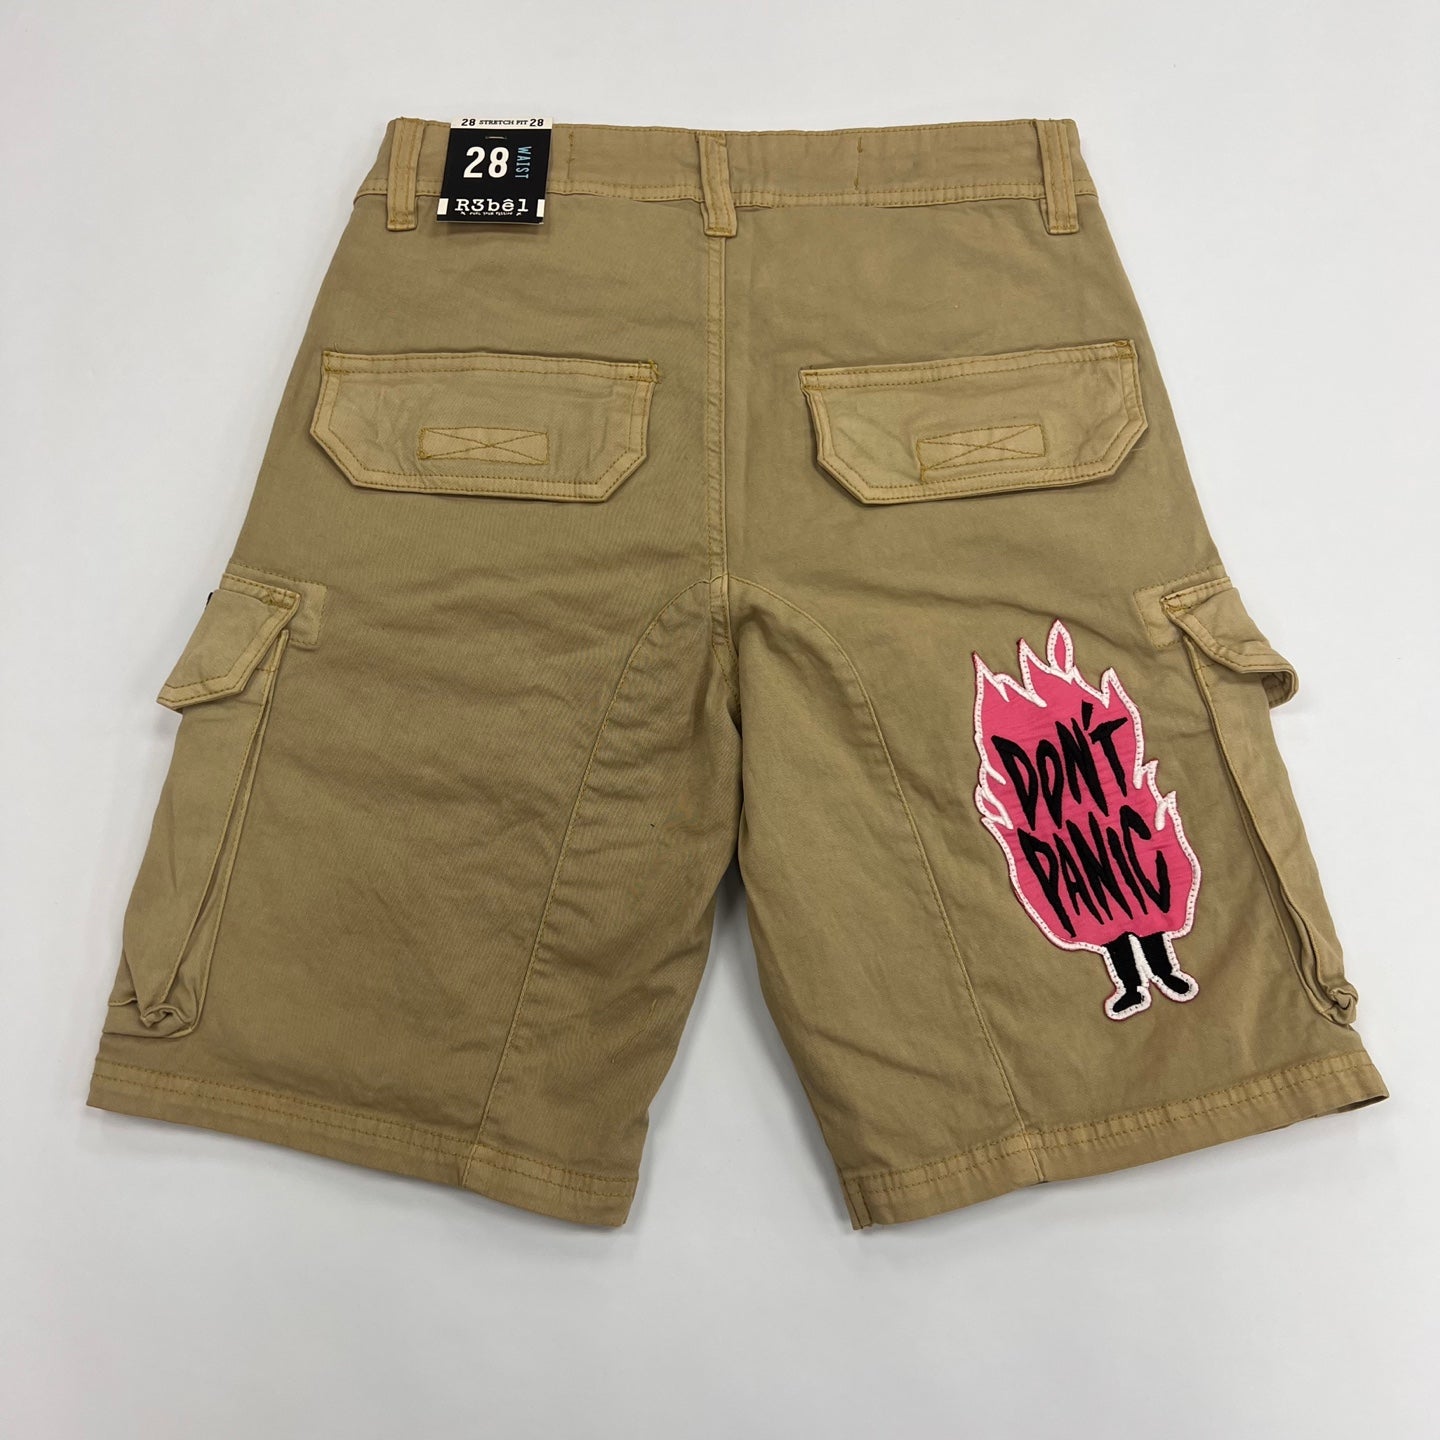 REBELMINDS Graphic Patch Cargo Shorts